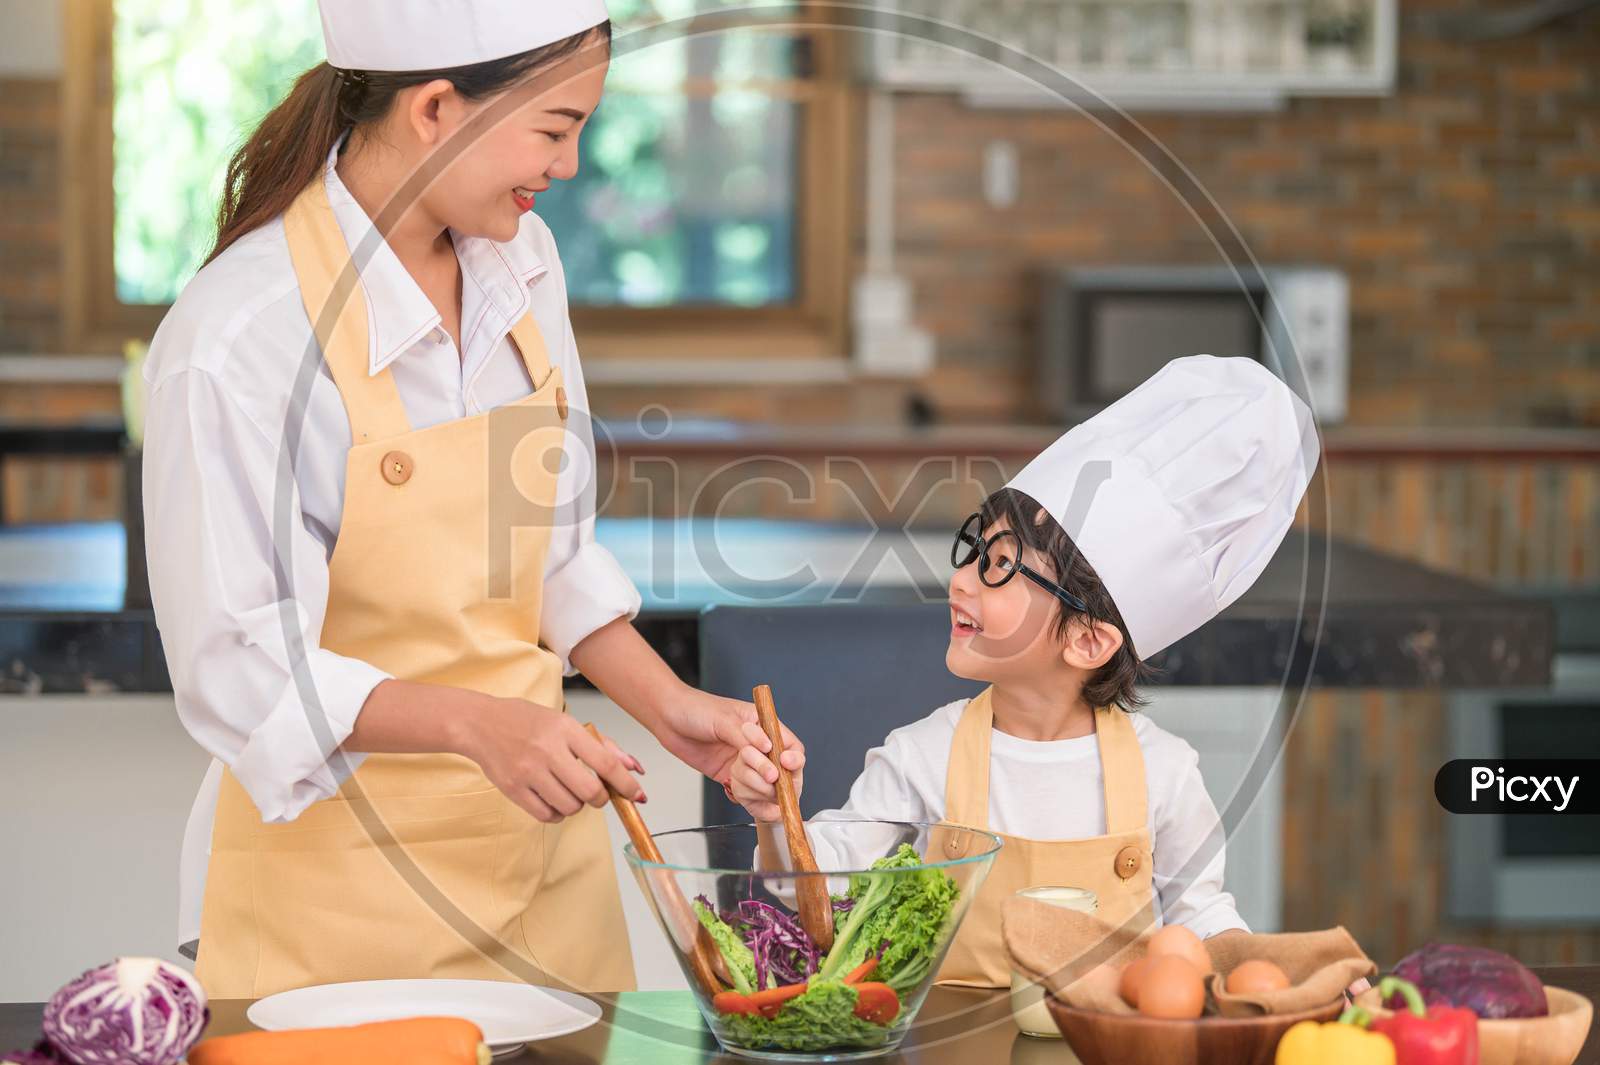 Happy Beautiful Asian Woman And Cute Little Boy With Eyeglasses Prepare To Cooking In Kitchen At Home. People Lifestyles And Family. Homemade Food And Ingredients Concept. Two Thai People Life